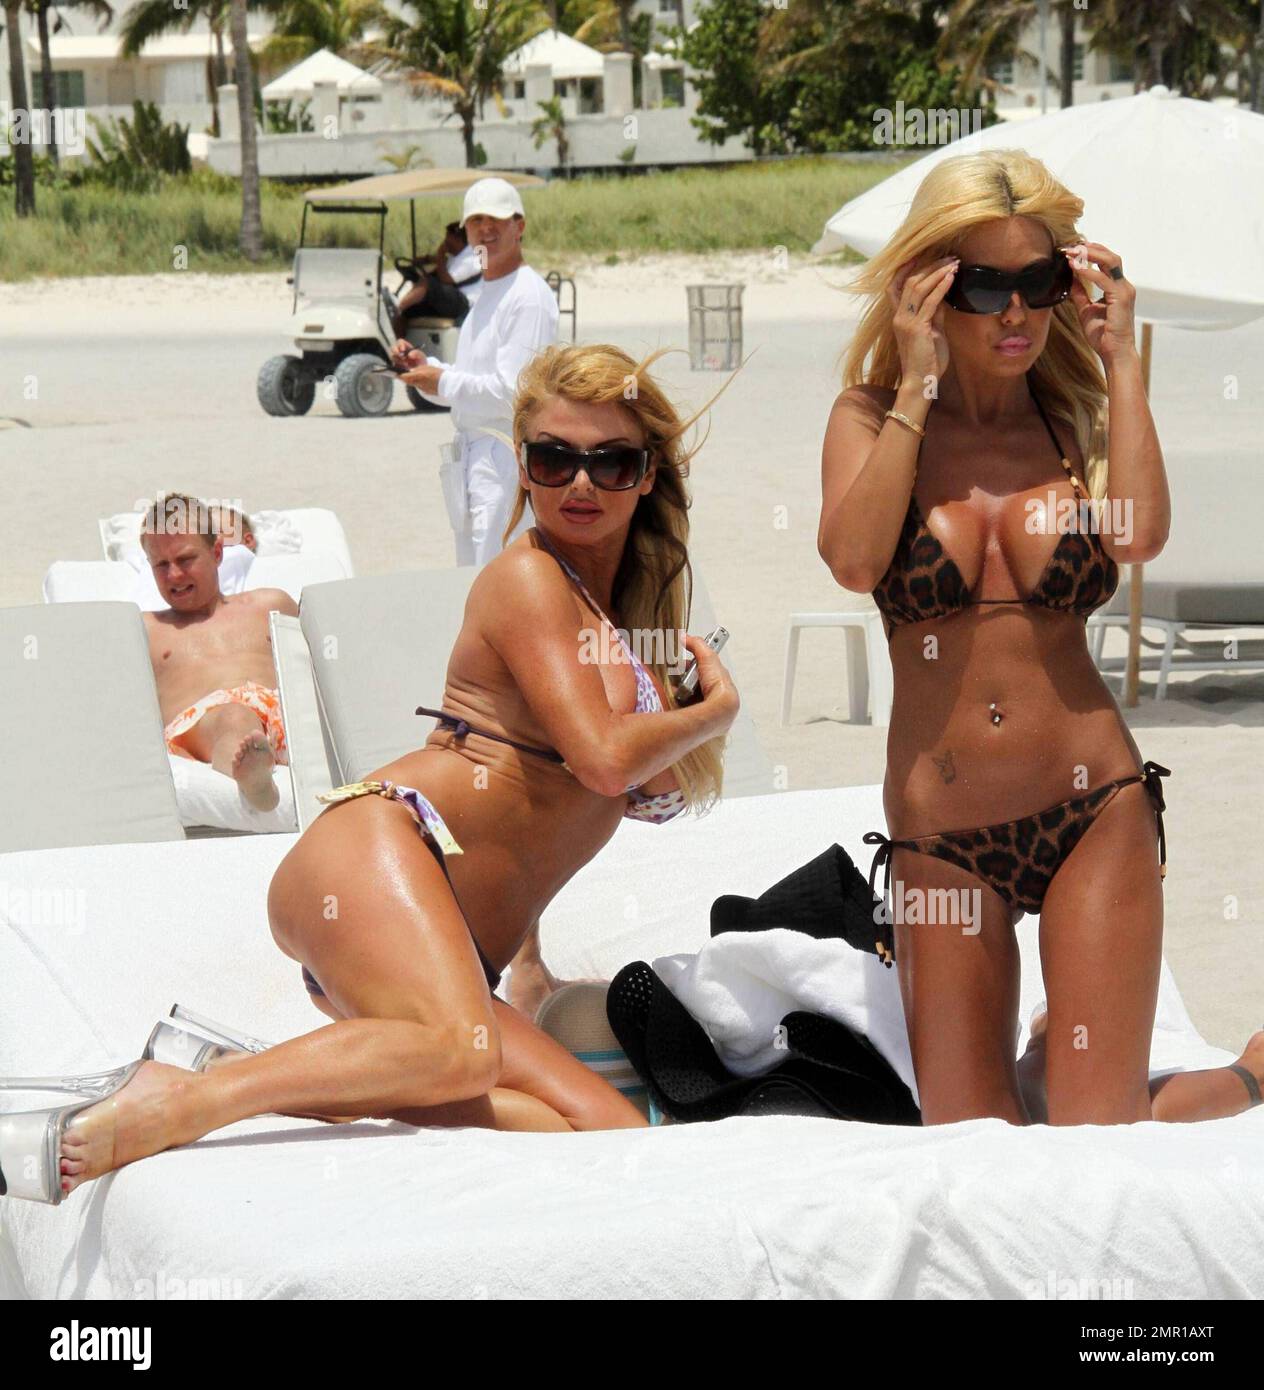 Shauna Sand and Playboy Radio Host, Taylor Wane, give the photographers and  eyeful in matching lucite heels and bikinis while enjoying a day at the  beach ahead of annual EXXXOTICA Expo which